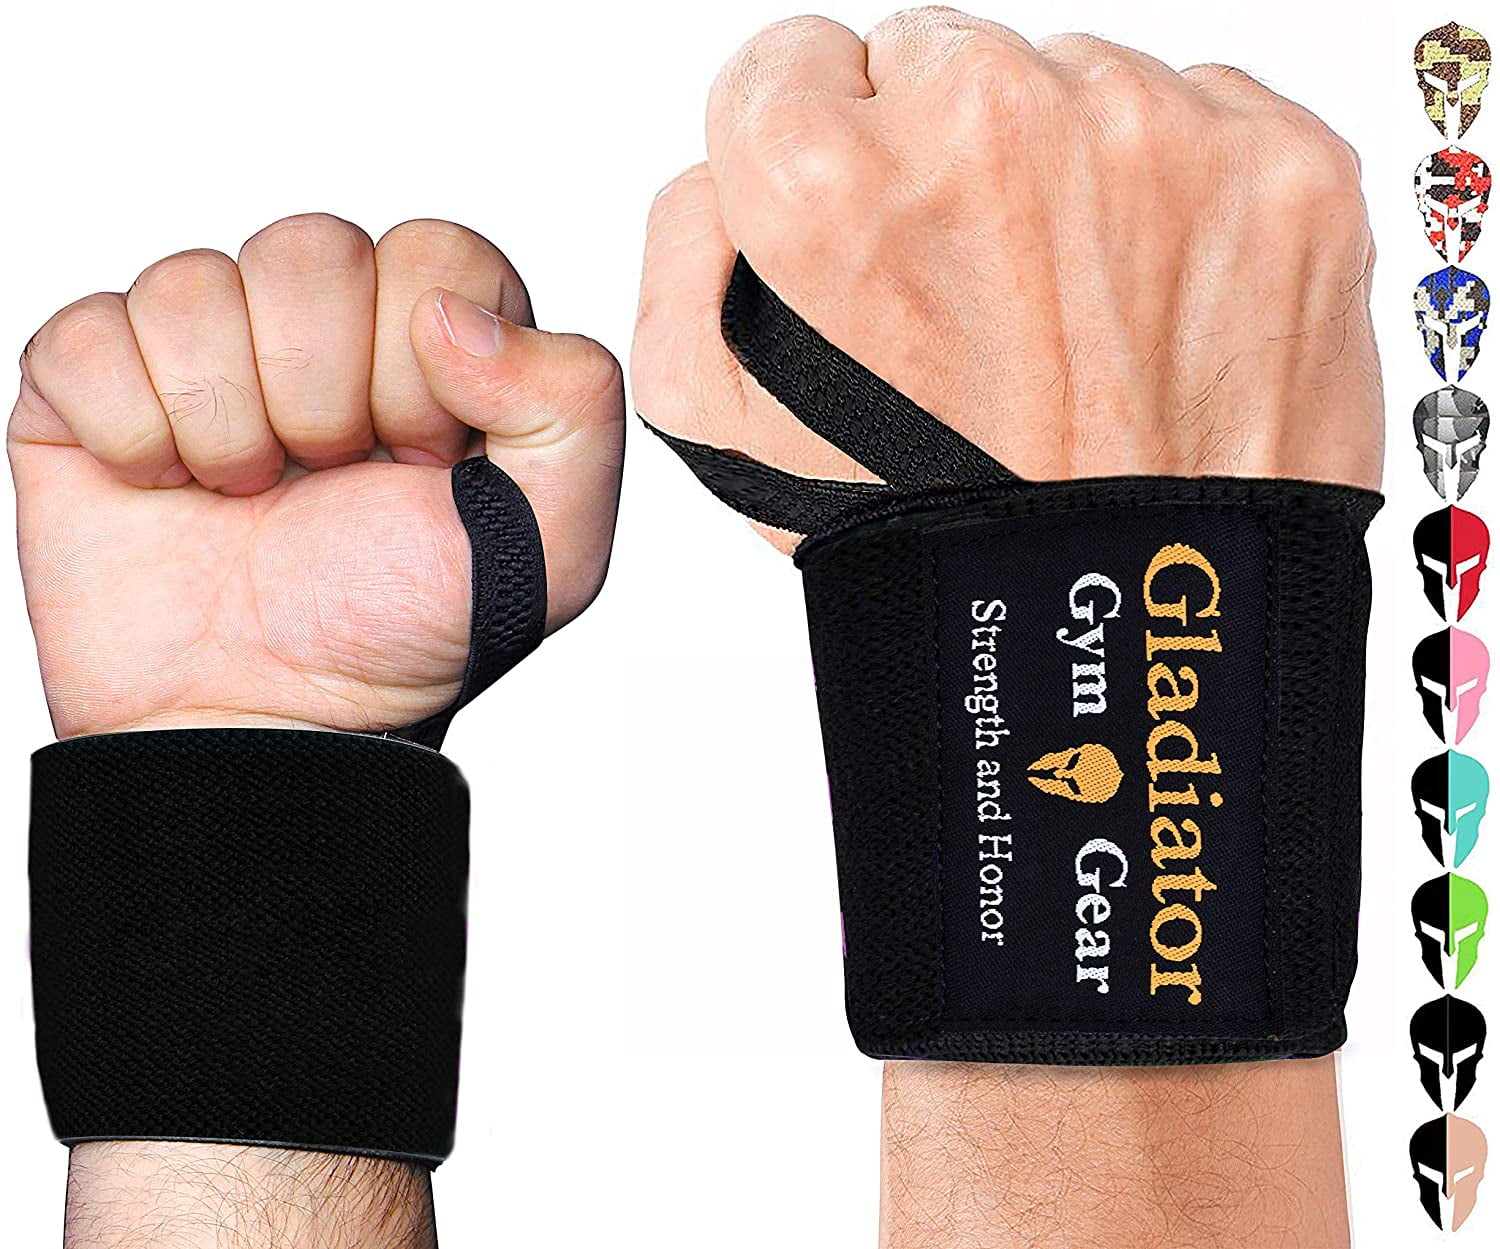 Weight Lifting Gym Hand Grips Palm Rubber Pad Wrist Support Training Straps L 